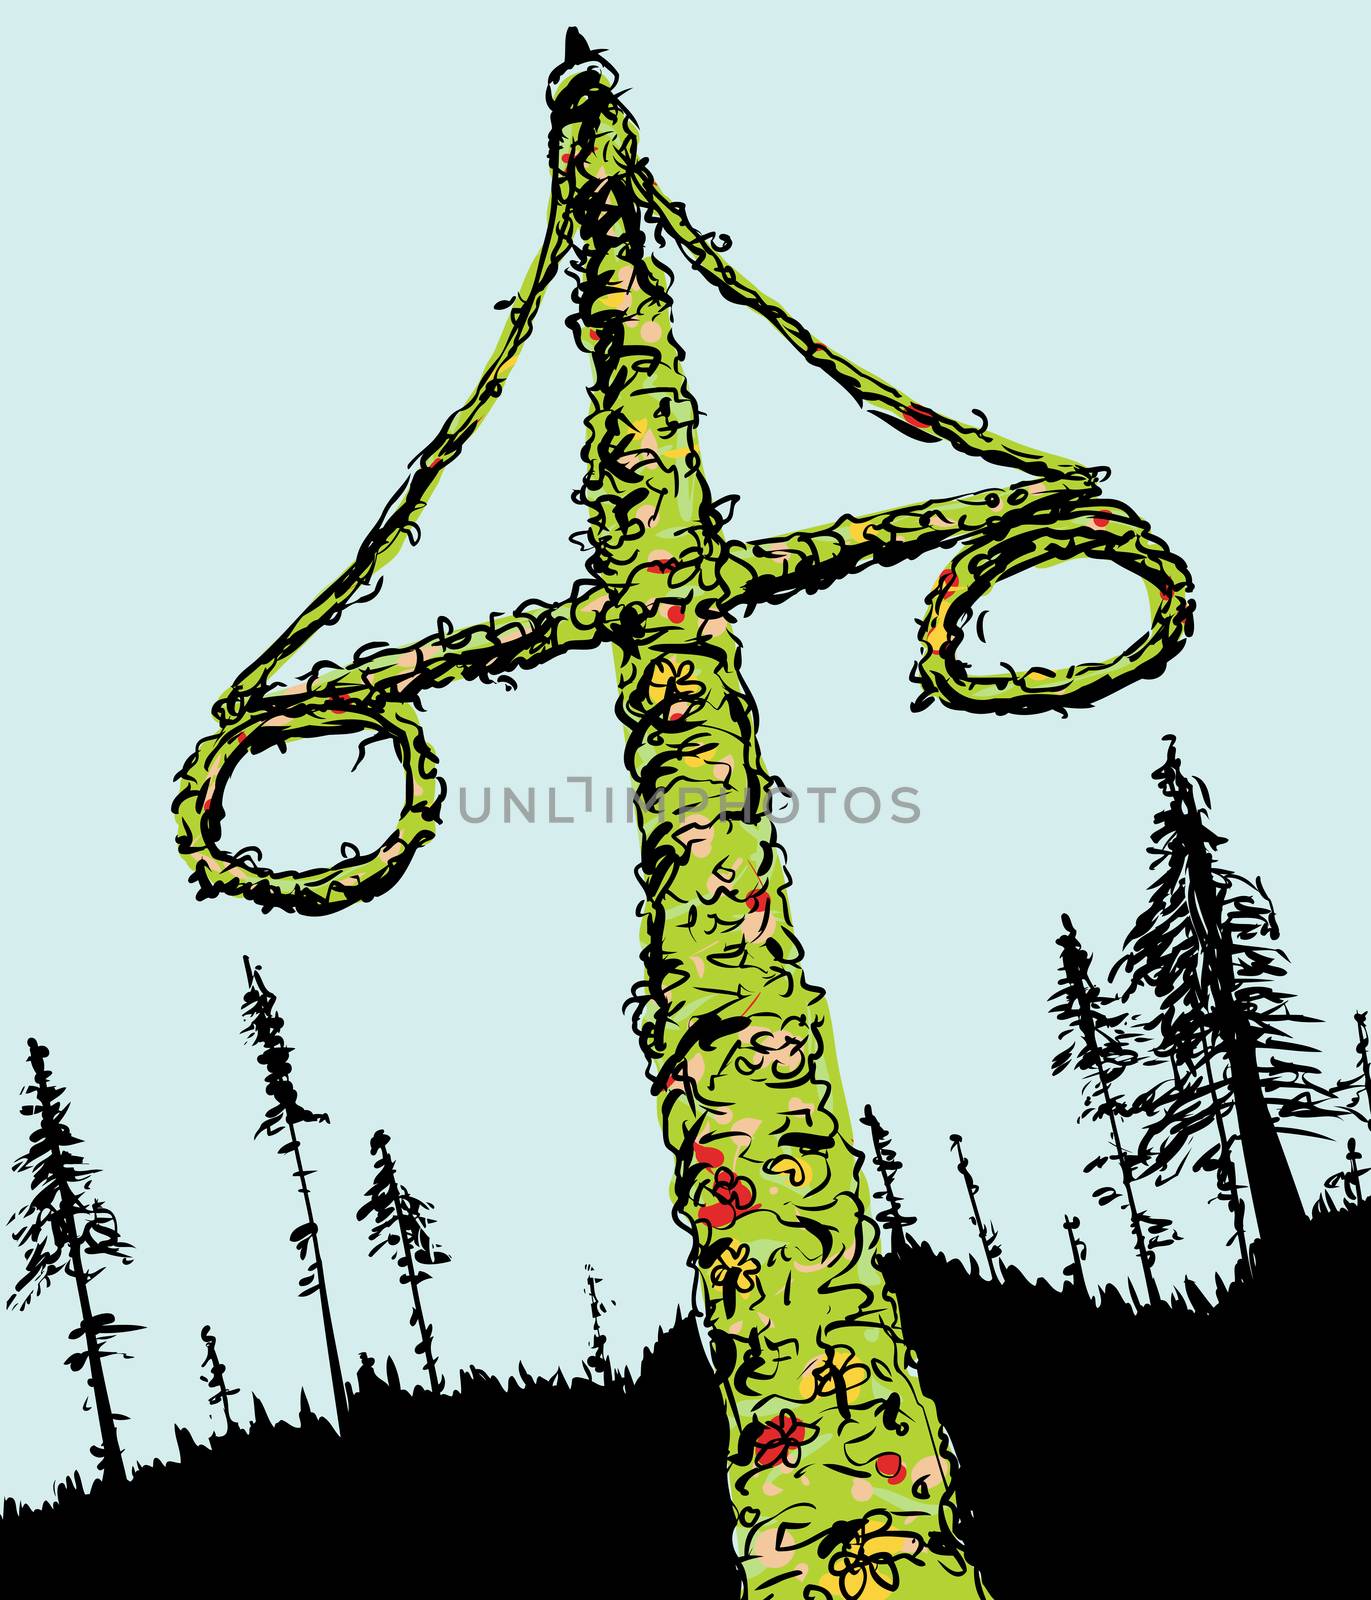 Sketch of decorated Swedish midsummer holiday Maypole with two wreaths and forest in background